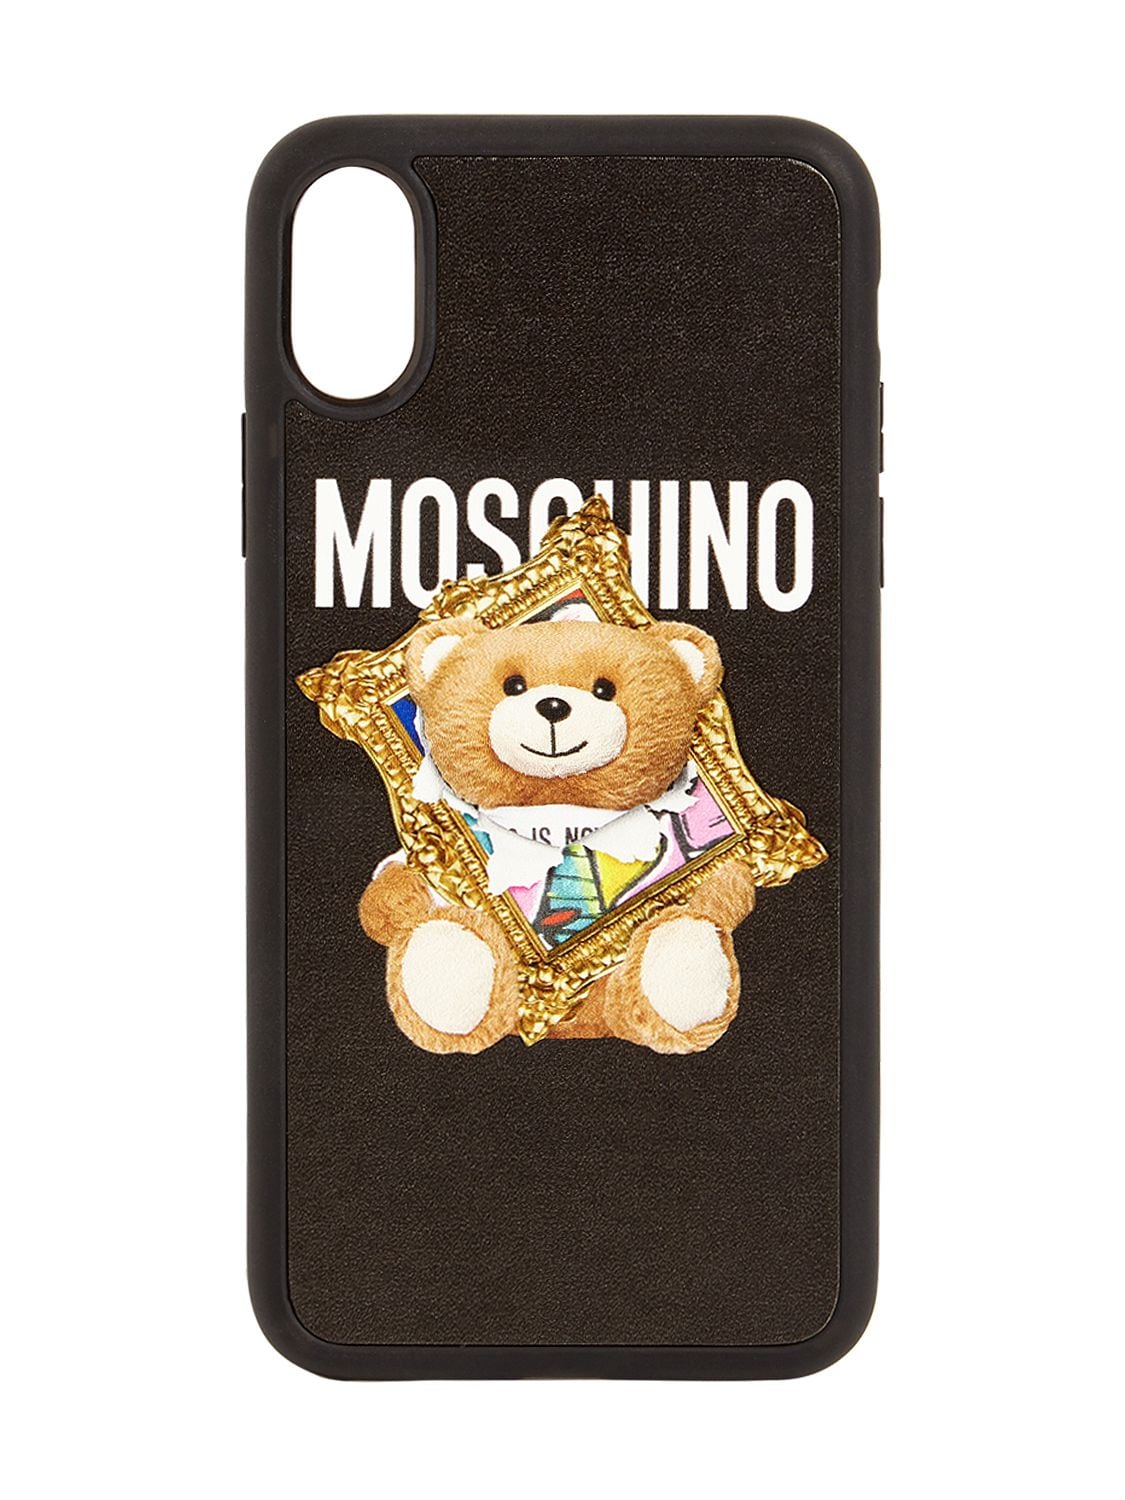 Moschino Teddy Printed Iphone Xs Max Cover In Black